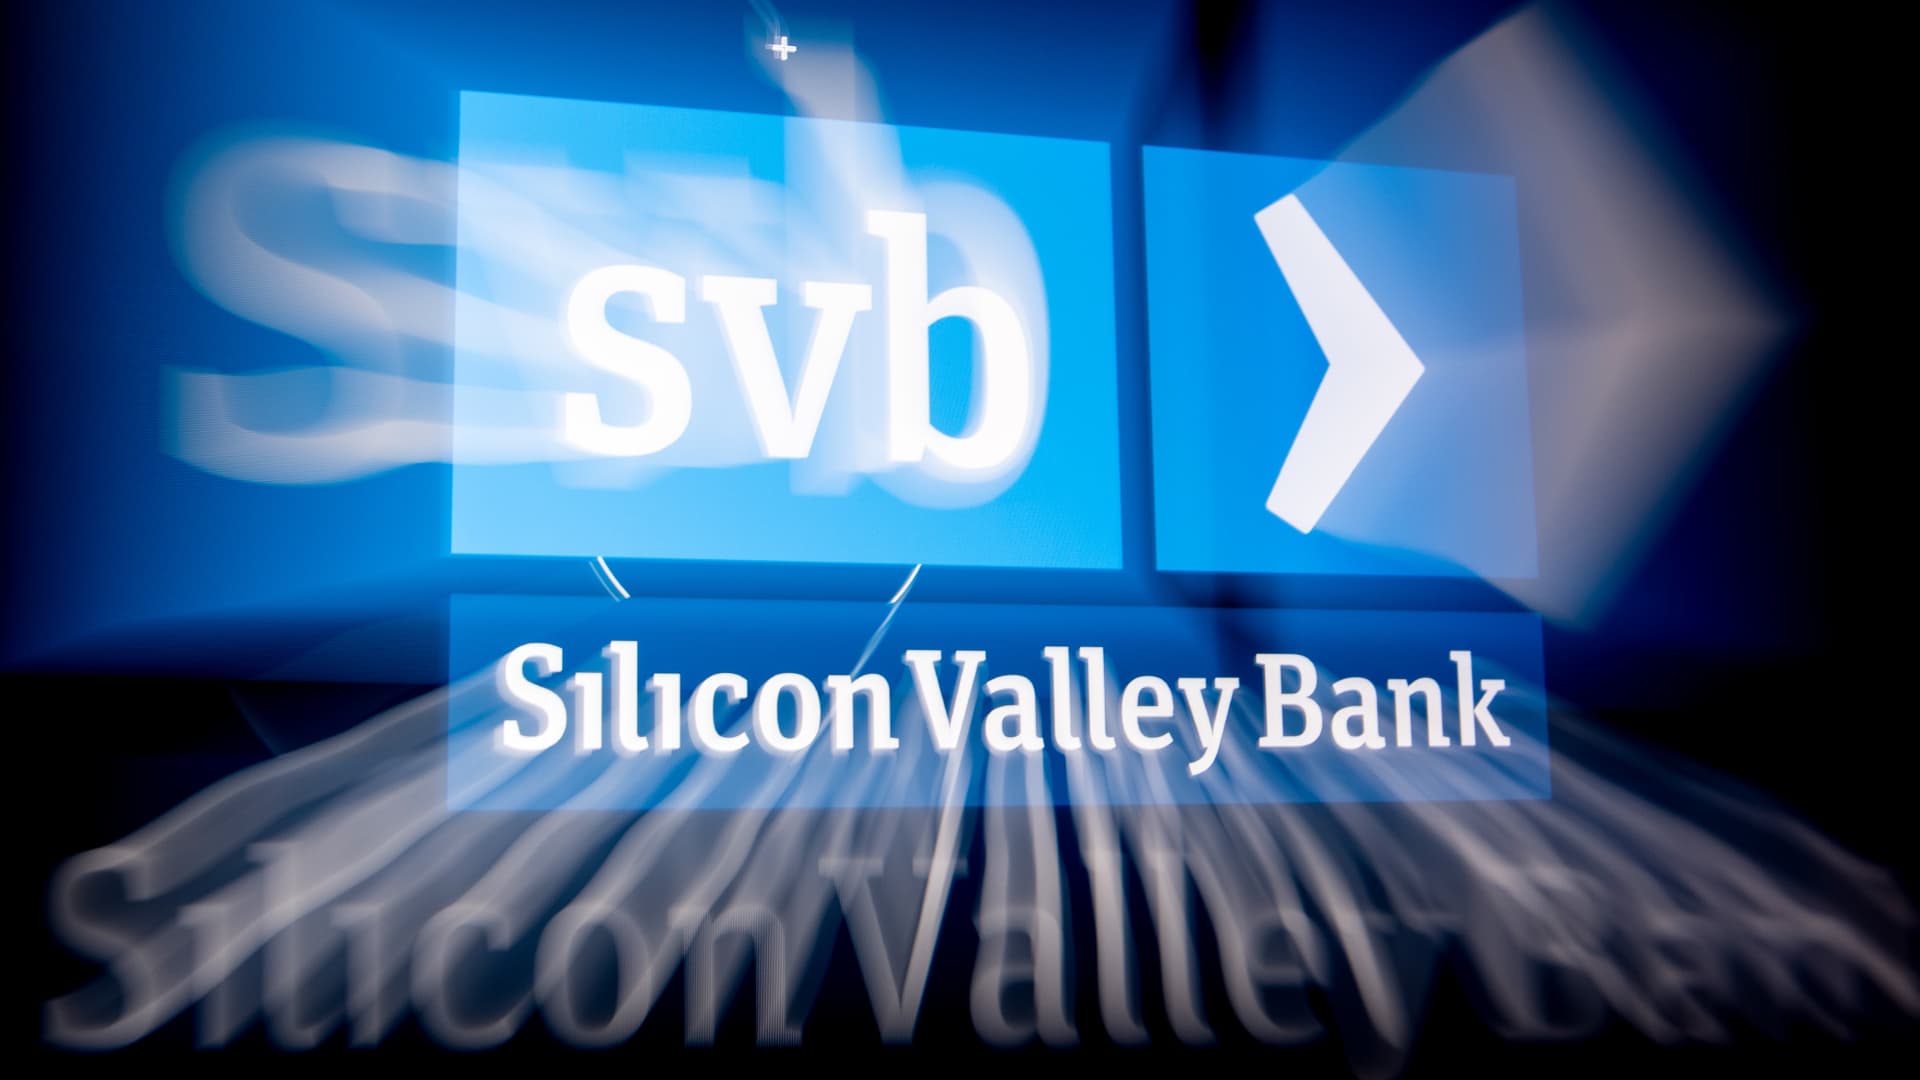 Silicon Valley investors and founders express shock over SVB's collapse, describe struggles to get money out